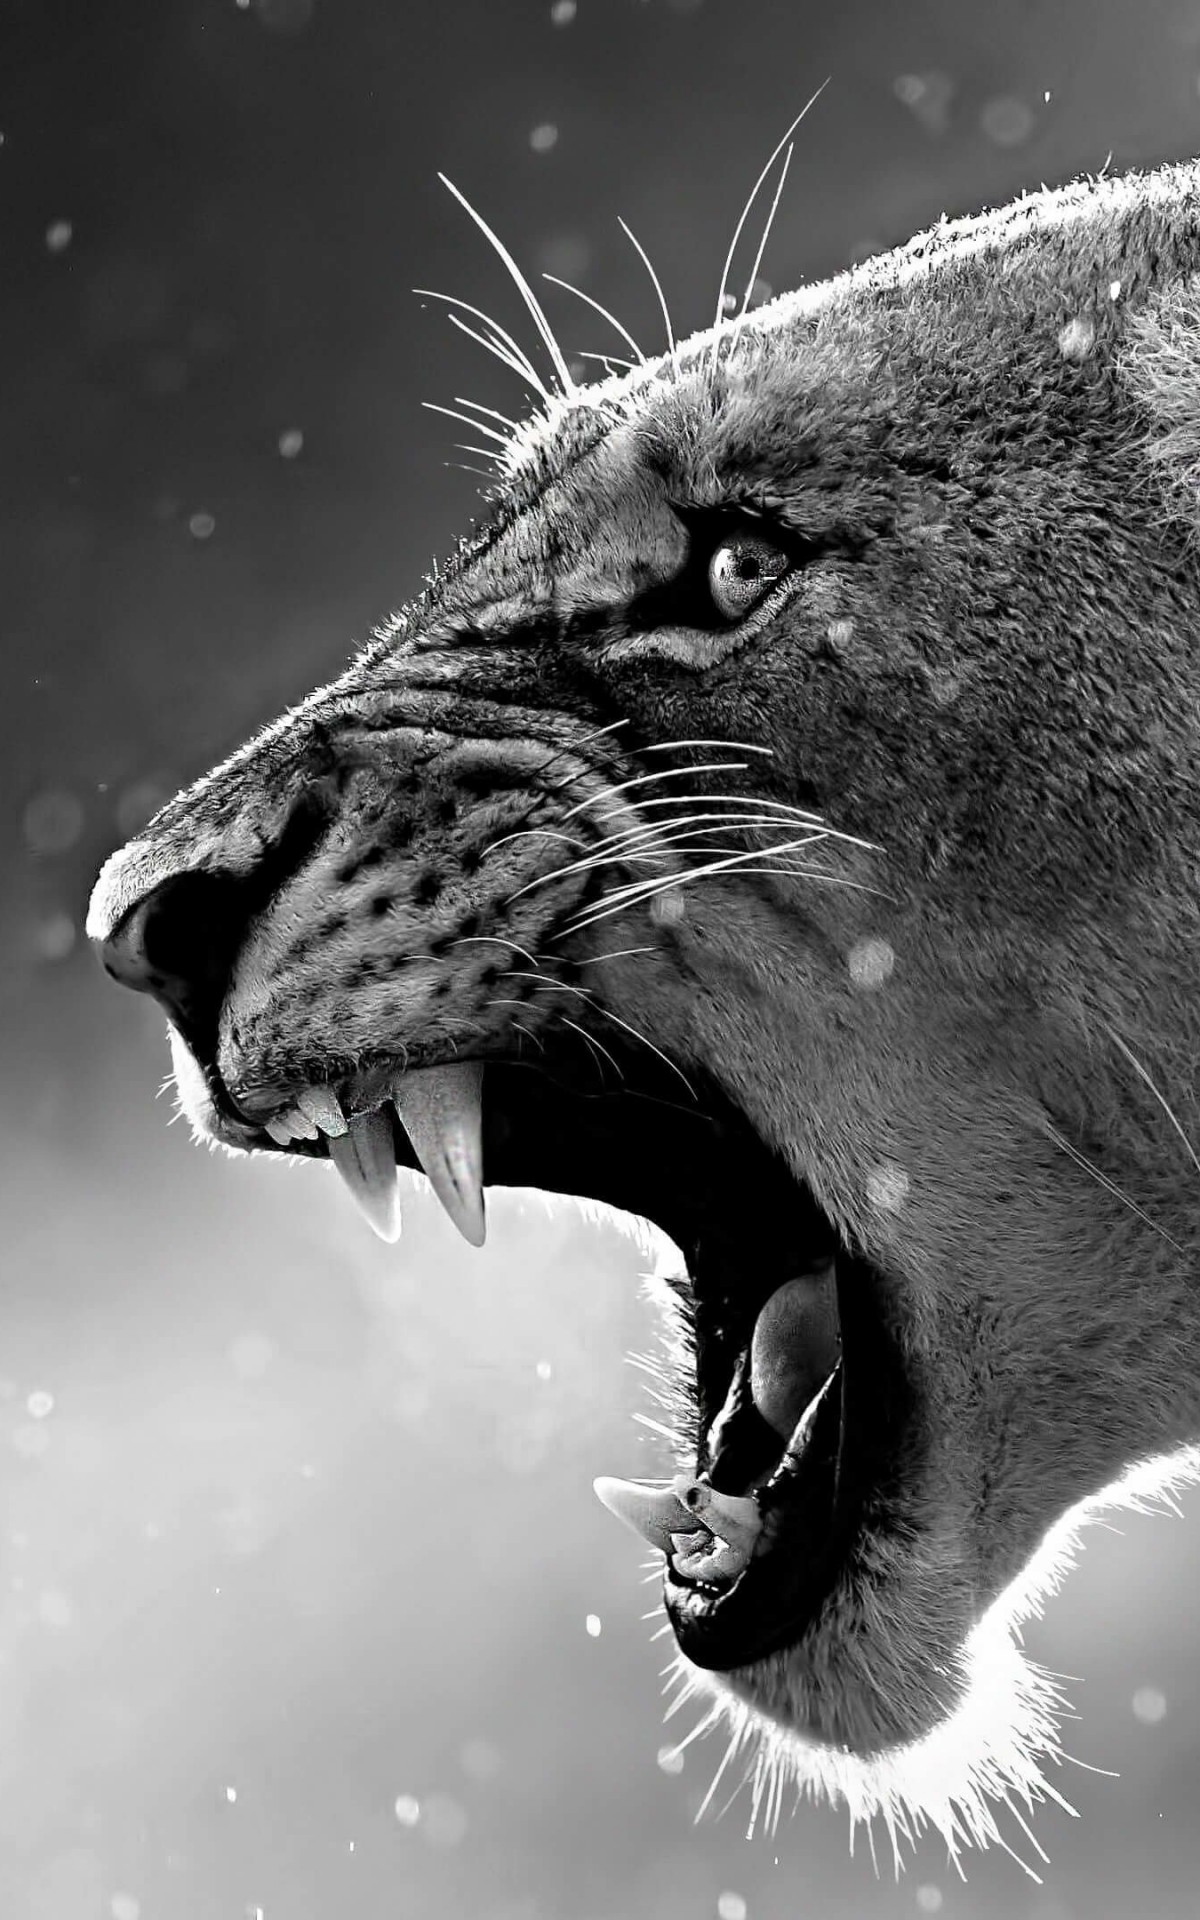 Lioness in Black & White Wallpaper for Amazon Kindle Fire HDX